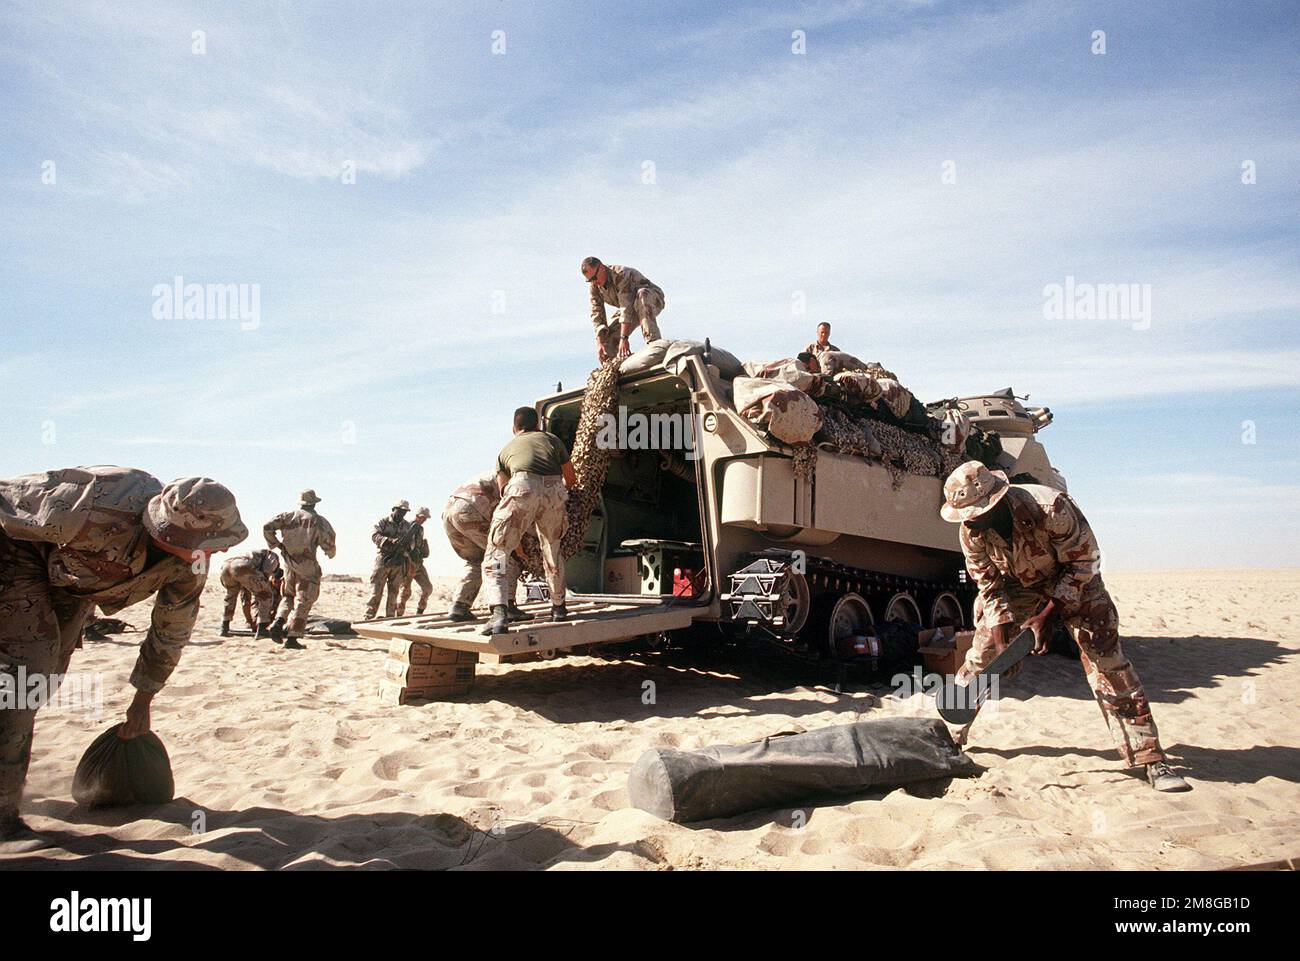 Members of the 1ST Plt., Co. D, Amphibious Assault Bn., 2nd Marines, remove camouflage netting from an AAV-7A1 amphibious assault vehicle during an Operation Imminent Thunder training exercise, a part of Operation Desert Shield. Subject Operation/Series: IMMINENT THUNDERDESERT SHIELD Country: Saudi Arabia (SAU) Stock Photo